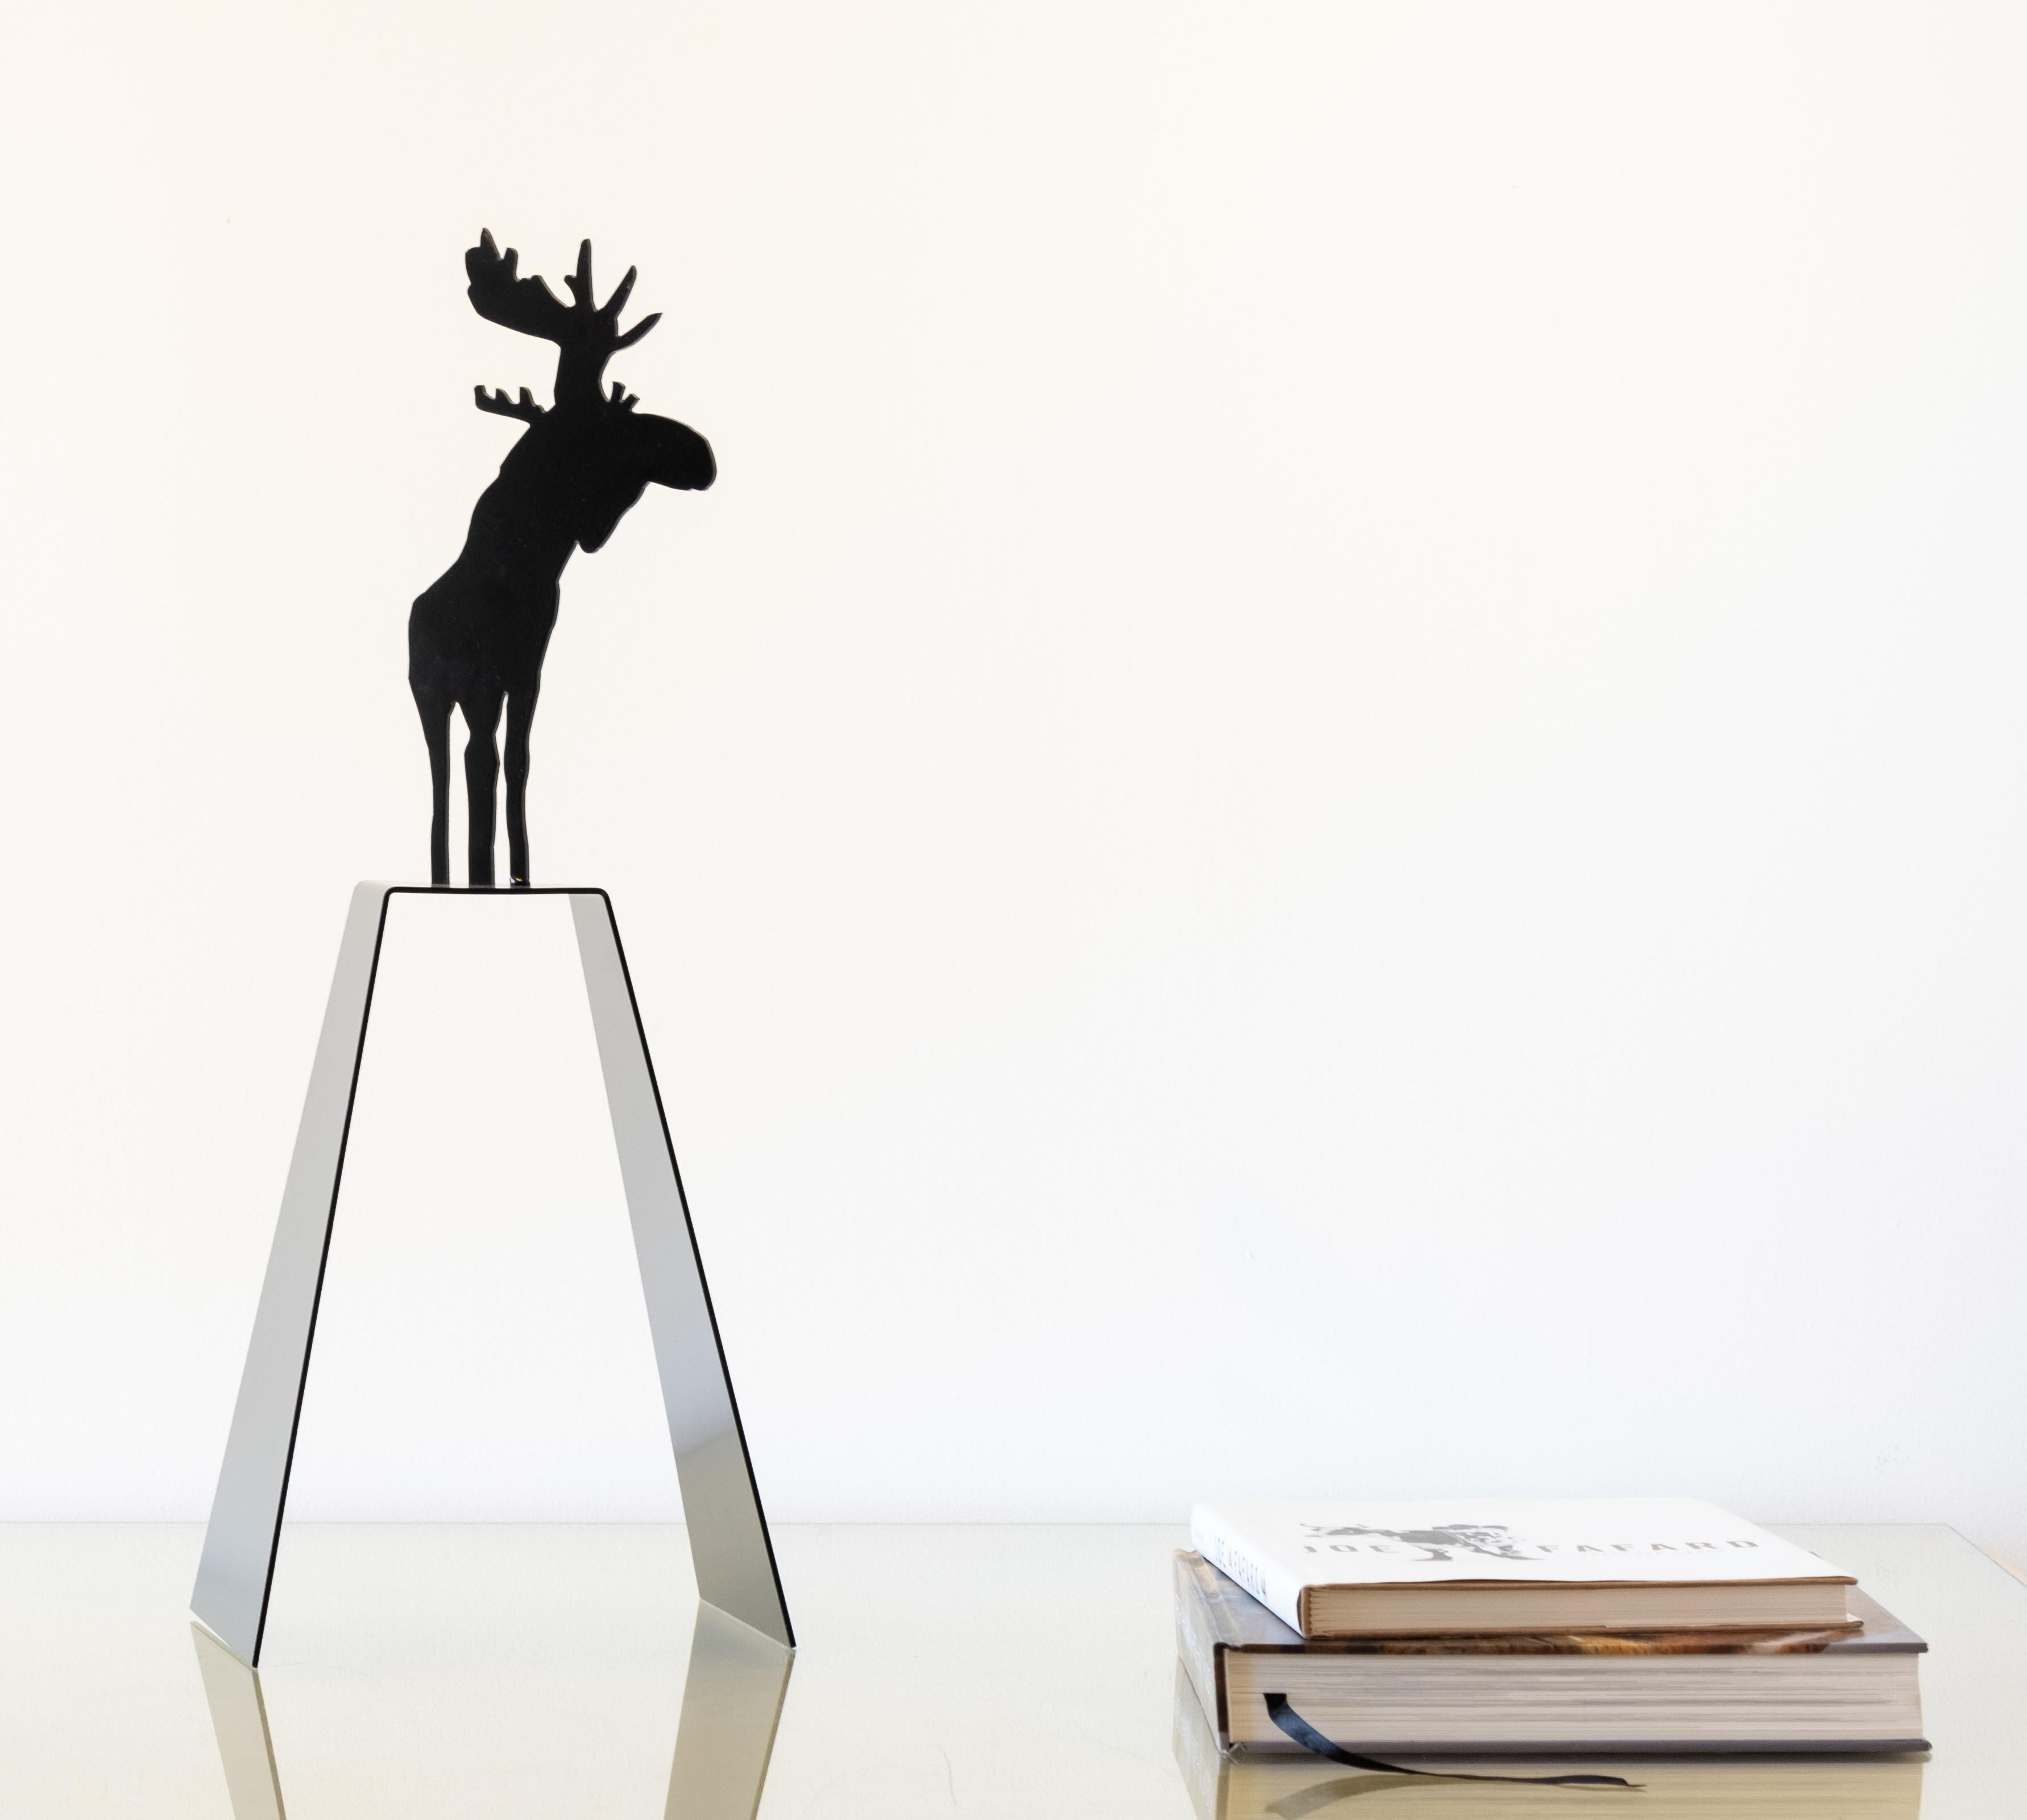 The unmistakable silhouette of a moose—one of Canada’s iconic images is celebrated in this sculpture by Charlie Pachter. As a little boy, pop artist Pachter once met a moose at a local fair. The memory of that encounter stayed with him and decades